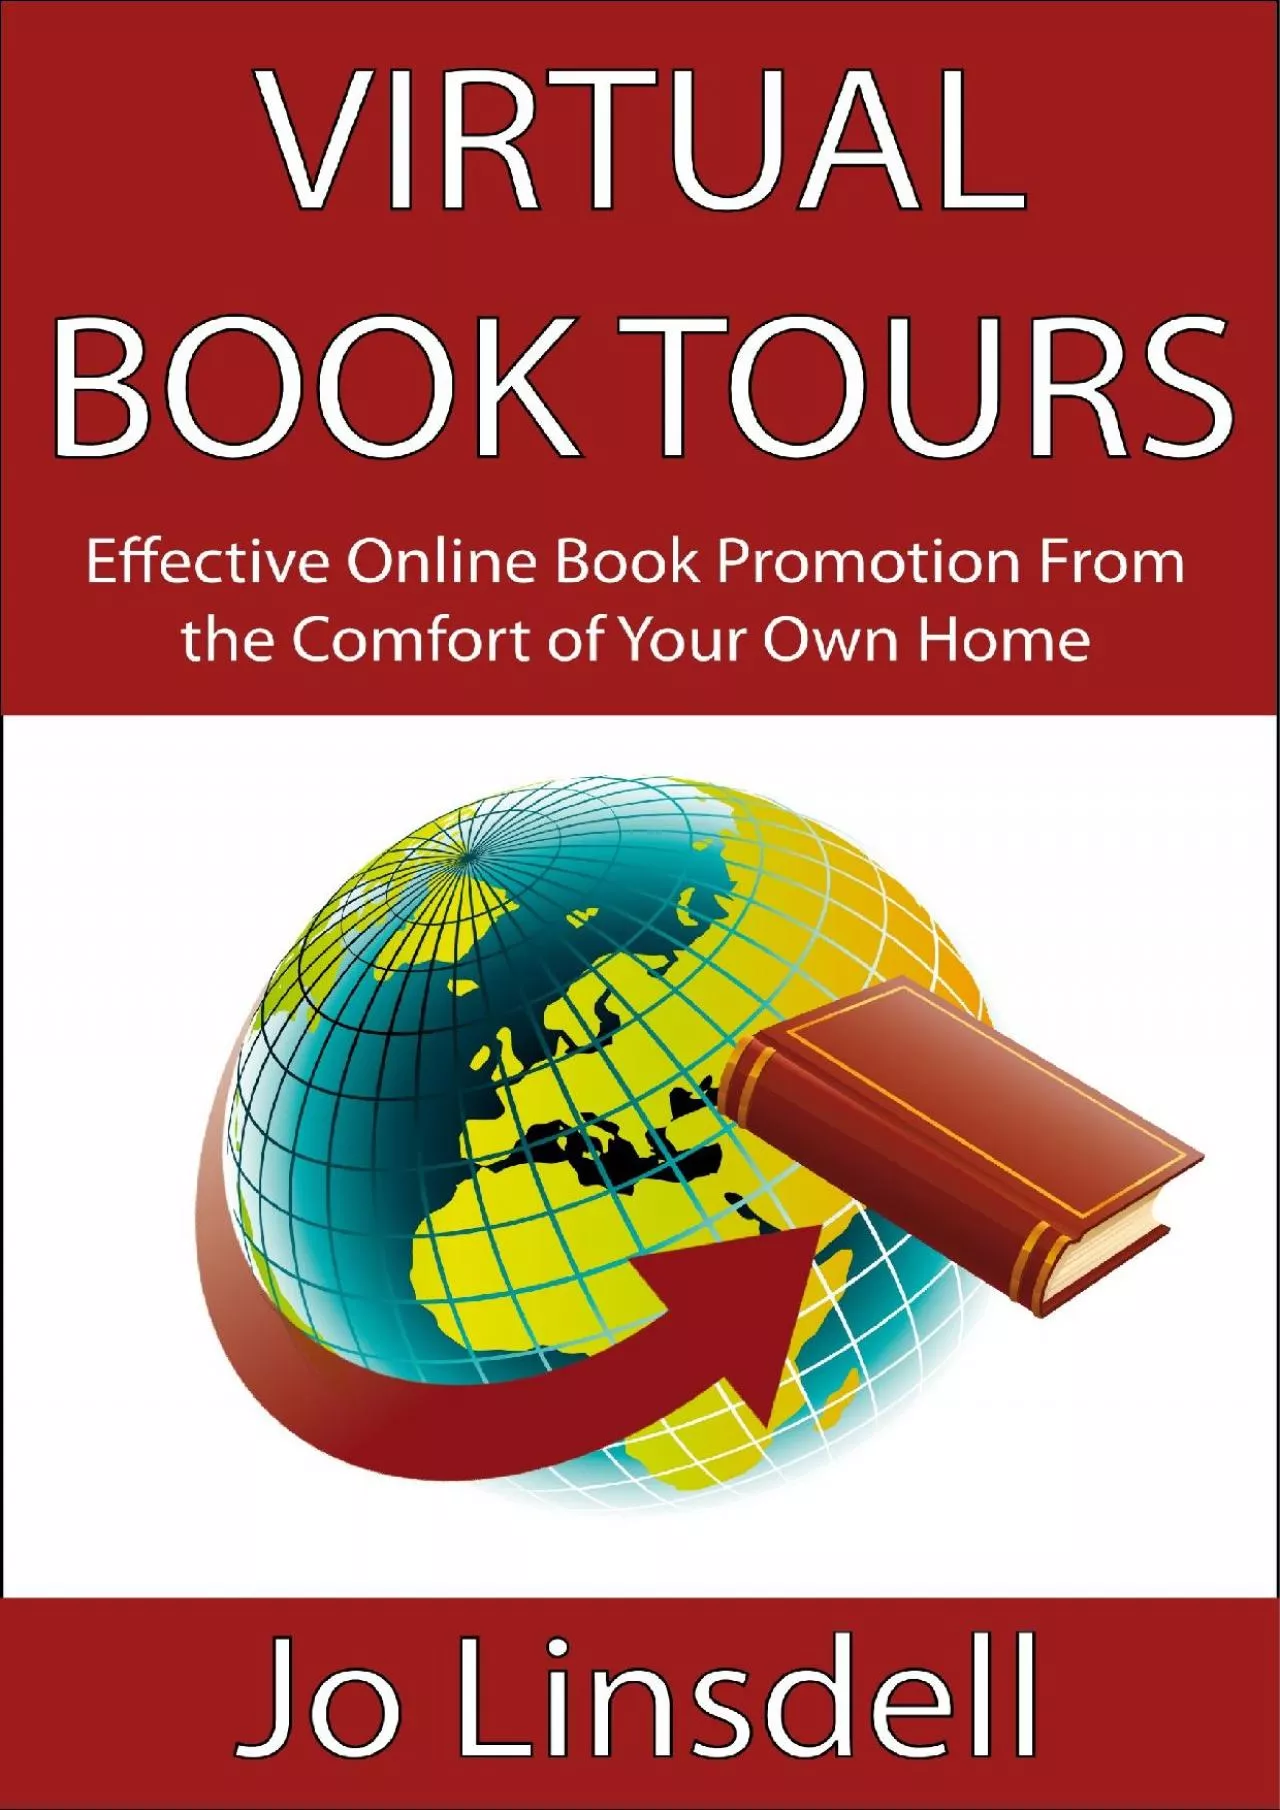 (BOOS)-Virtual Book Tours Effective Online Book Promotion From the Comfort of Your Own